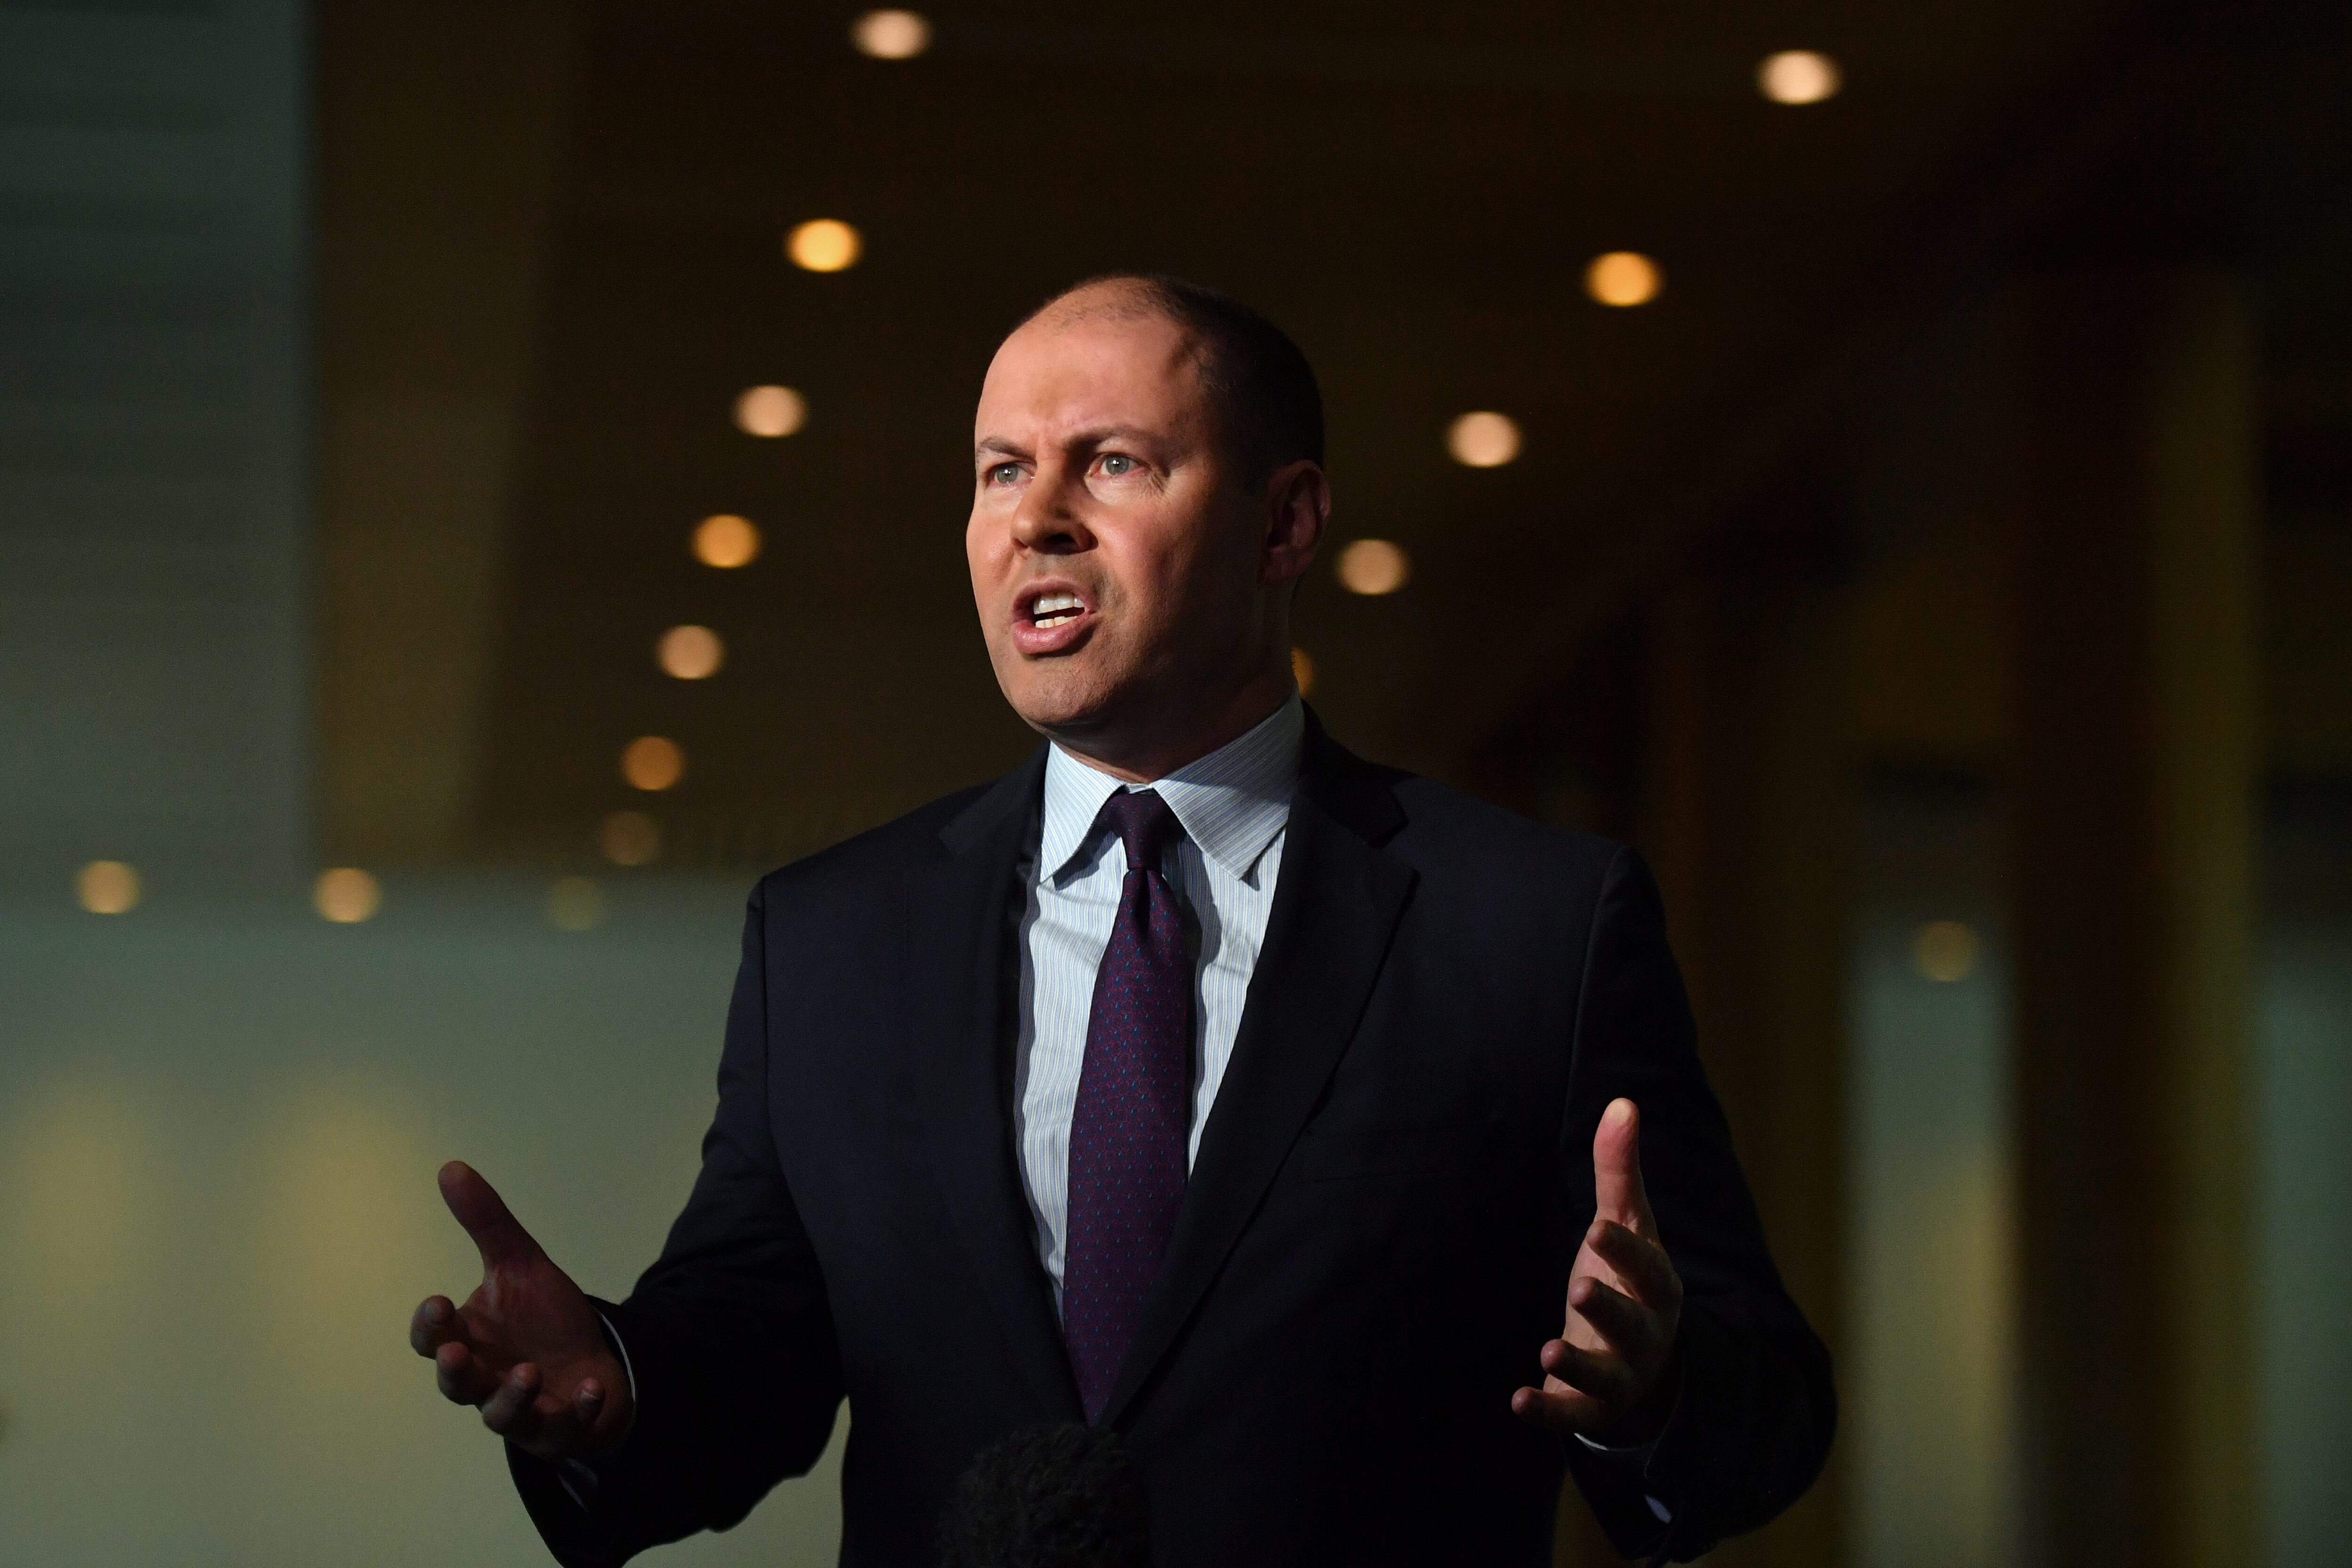 Treasurer Josh Frydenberg expects the jobless rate to rise to about 5.4 per cent, up from 5.1 per cent in February.